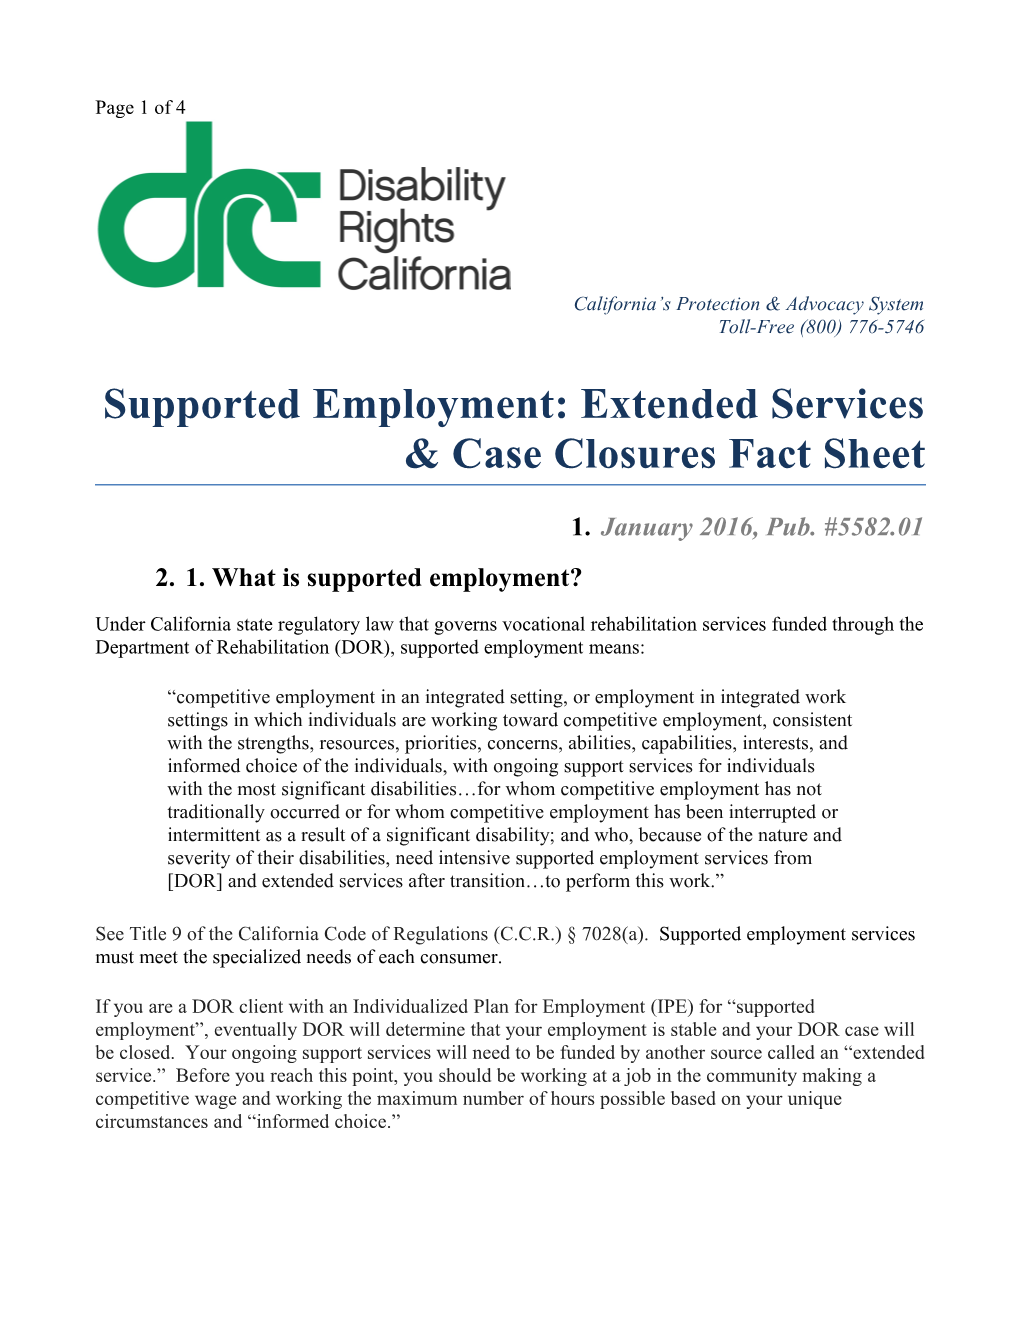 Supported Employment: Extended Services & Case Closures Fact Sheet